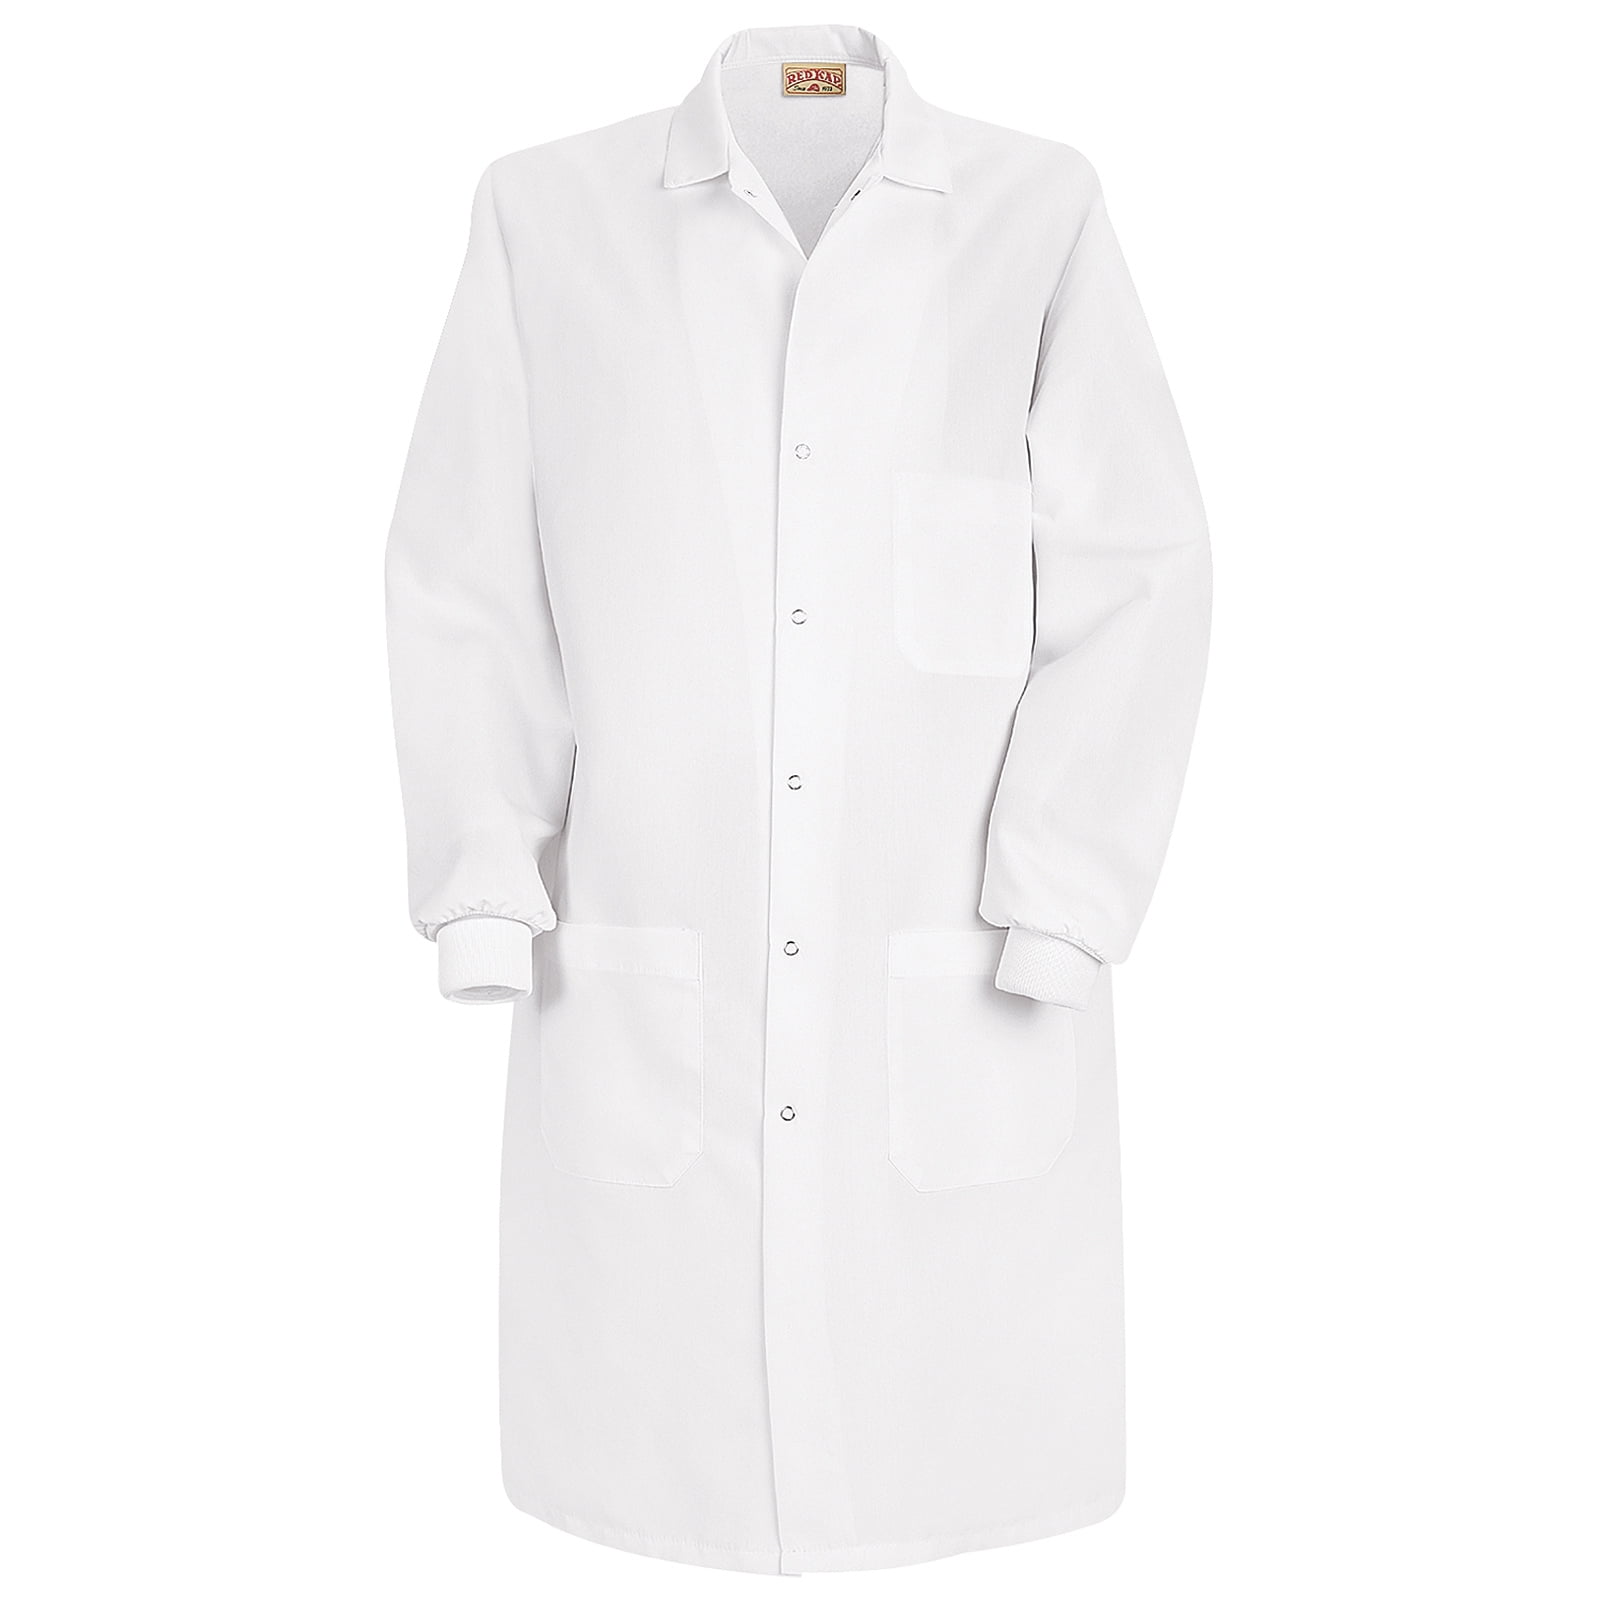 Red Kap unisex-adult Unisex Specialized Cuffed Lab Coat With 3 Front Pockets